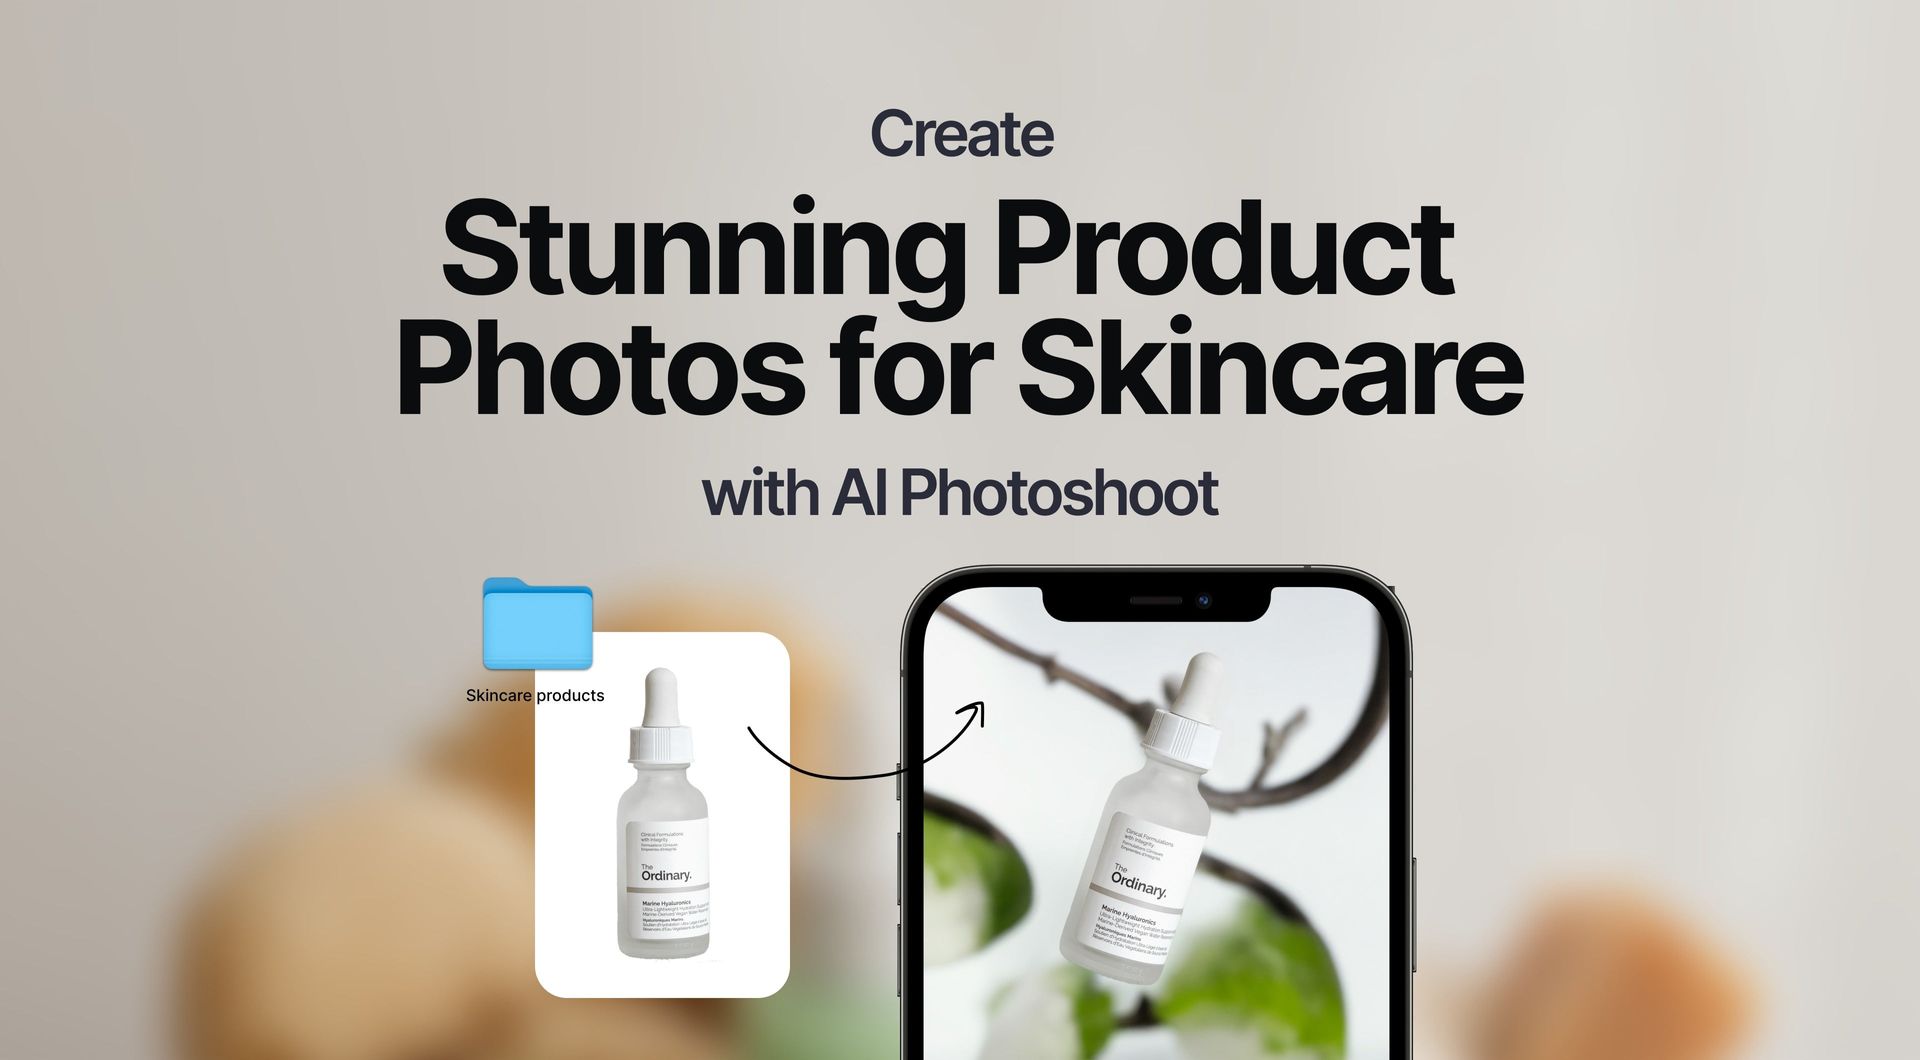 Picture for Create Stunning Product Photos for Skincare with AI Photoshoot article